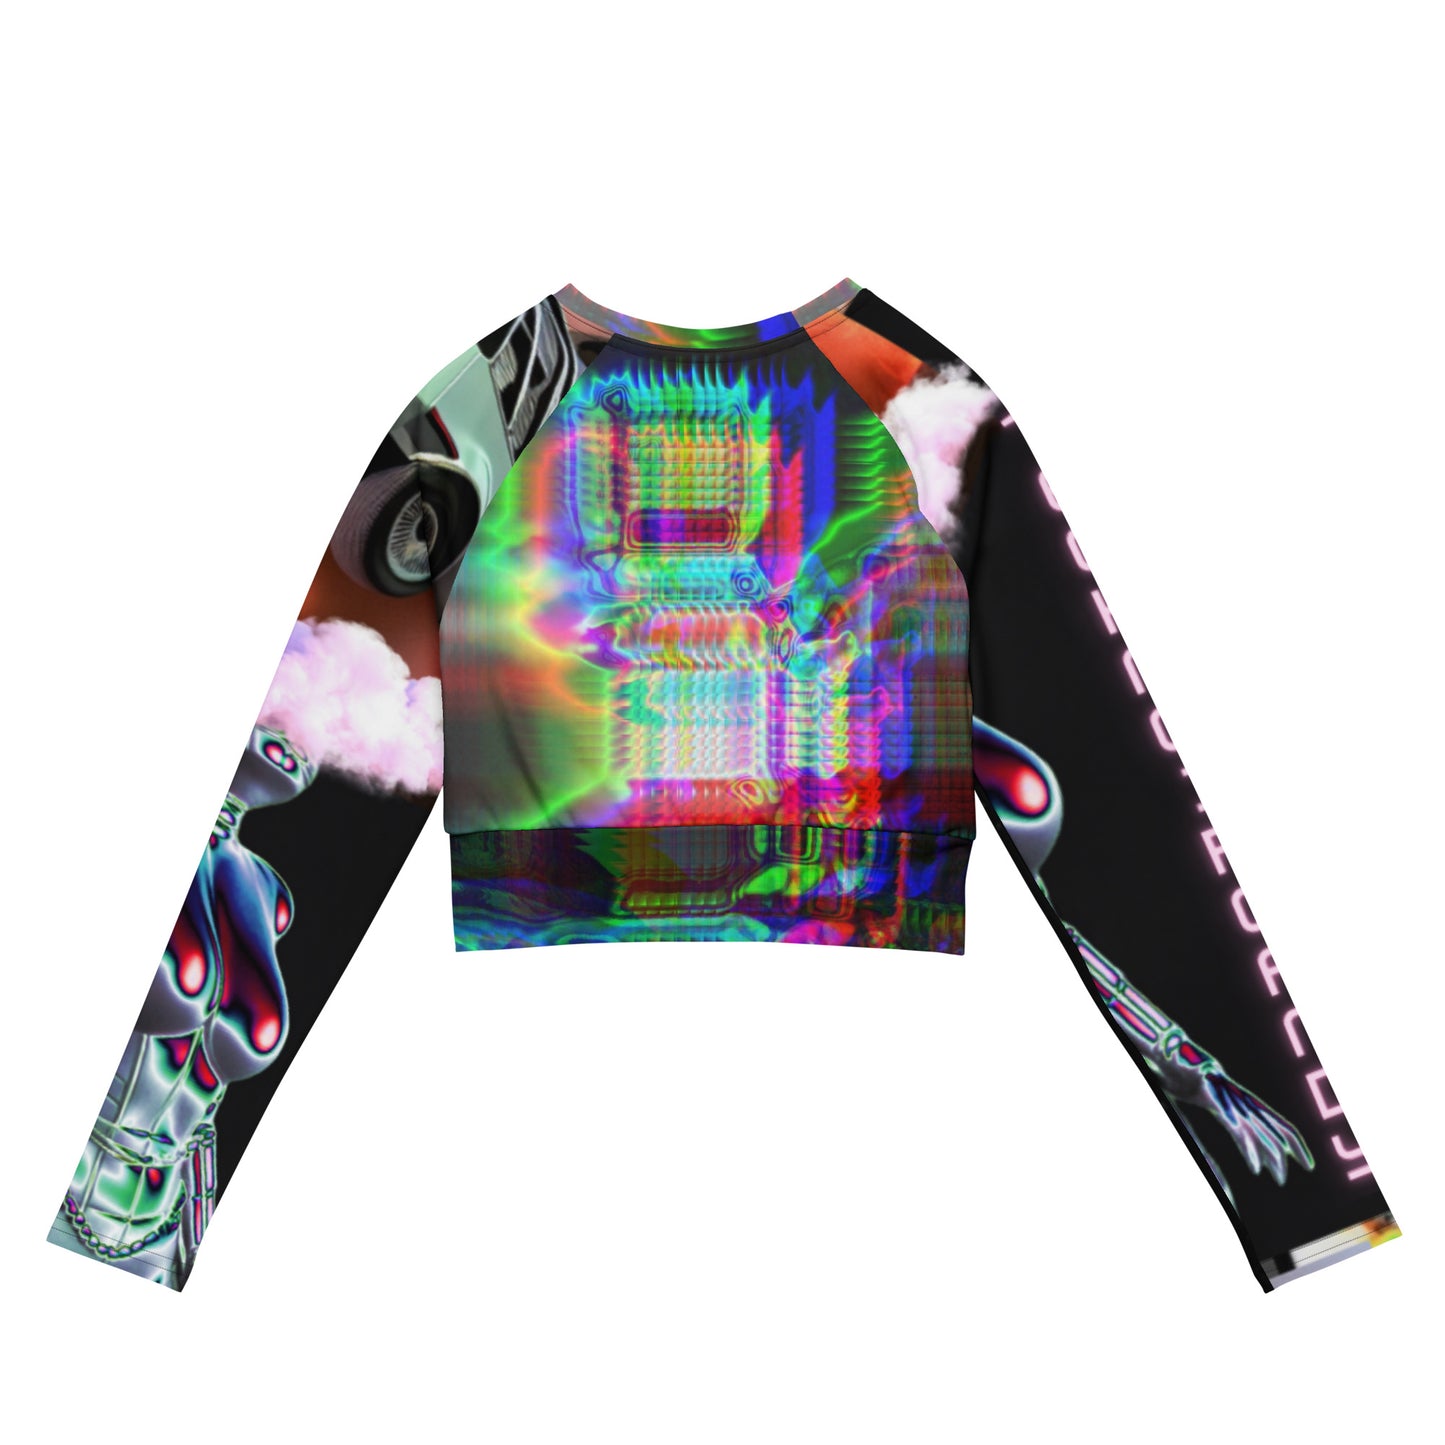 Cybertronic Daymare Recycled long-sleeve crop top